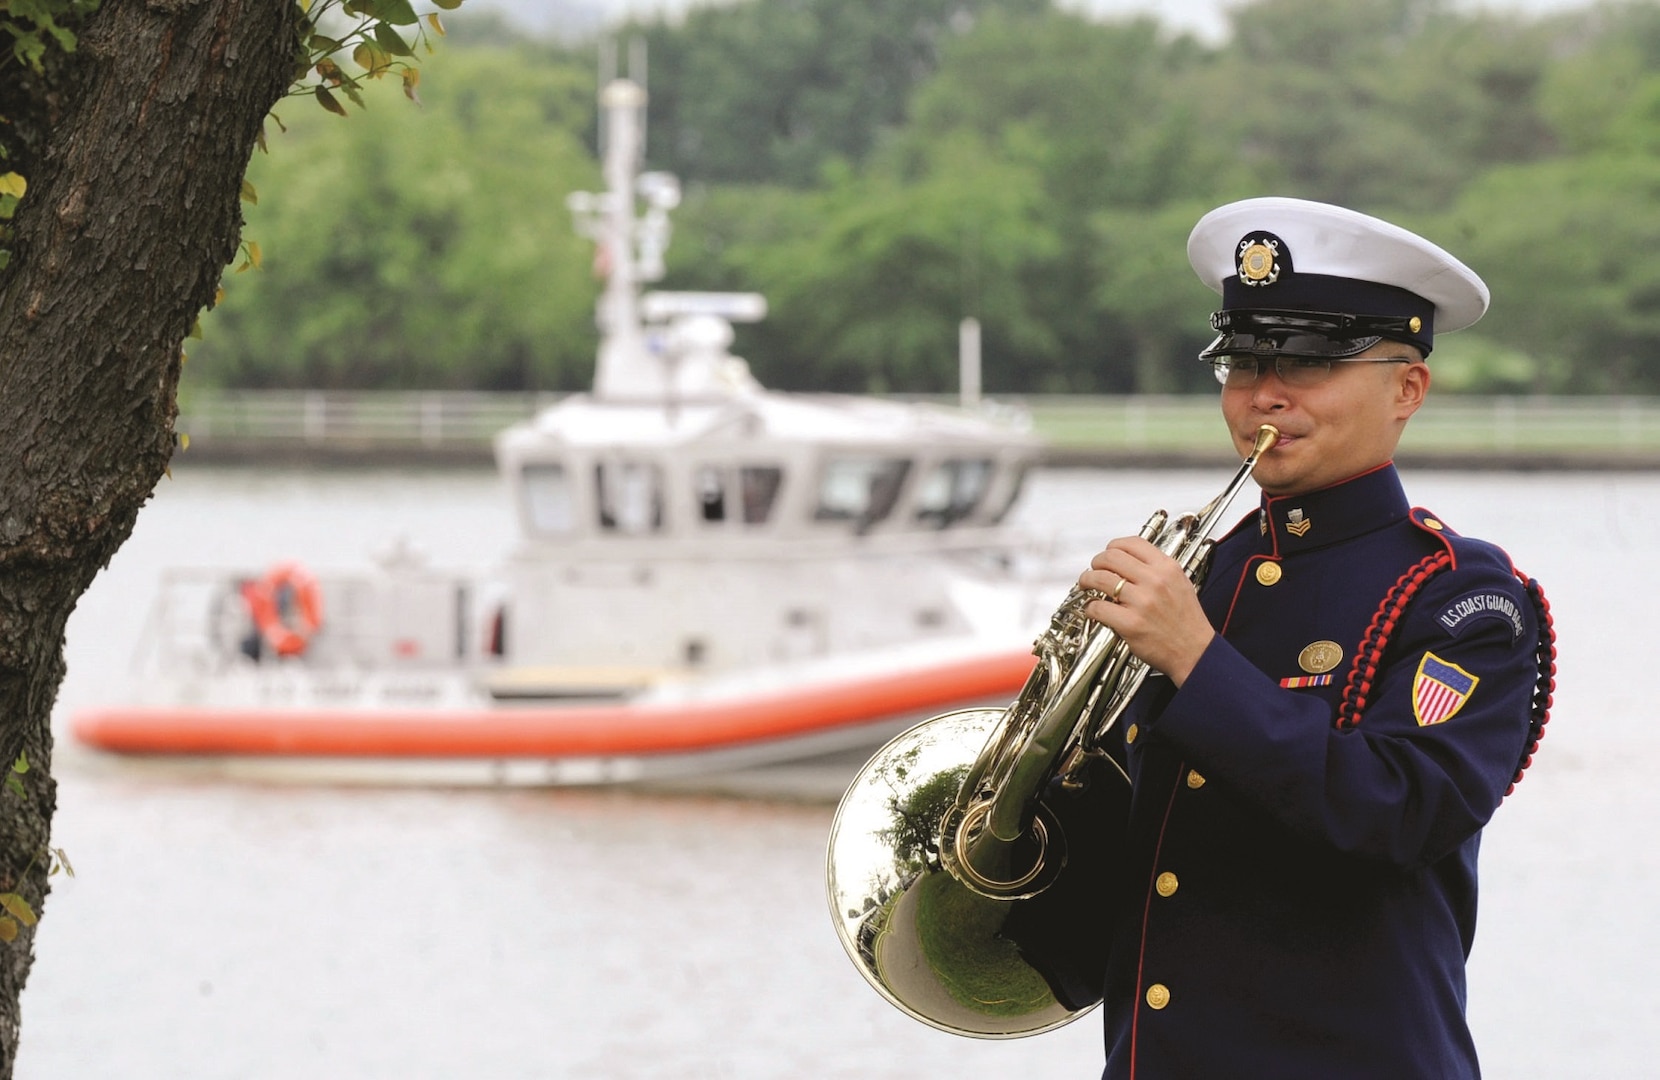 A U.S. Coast Guard Band member warms up as a boat patrols the Potomac near Ft. McNair during the U.S. Coast Guard Change of Command Ceremony, May 25, 2010.  Adm. Thad W. Allen was relieved by Adm. Robert J. Papp, Jr., as commandant of the U.S. Coast Guard in a ceremony presided over by Department of Homeland Security Secretary Janet Napolitano.  DOD photo by Cherie Cullen (released)